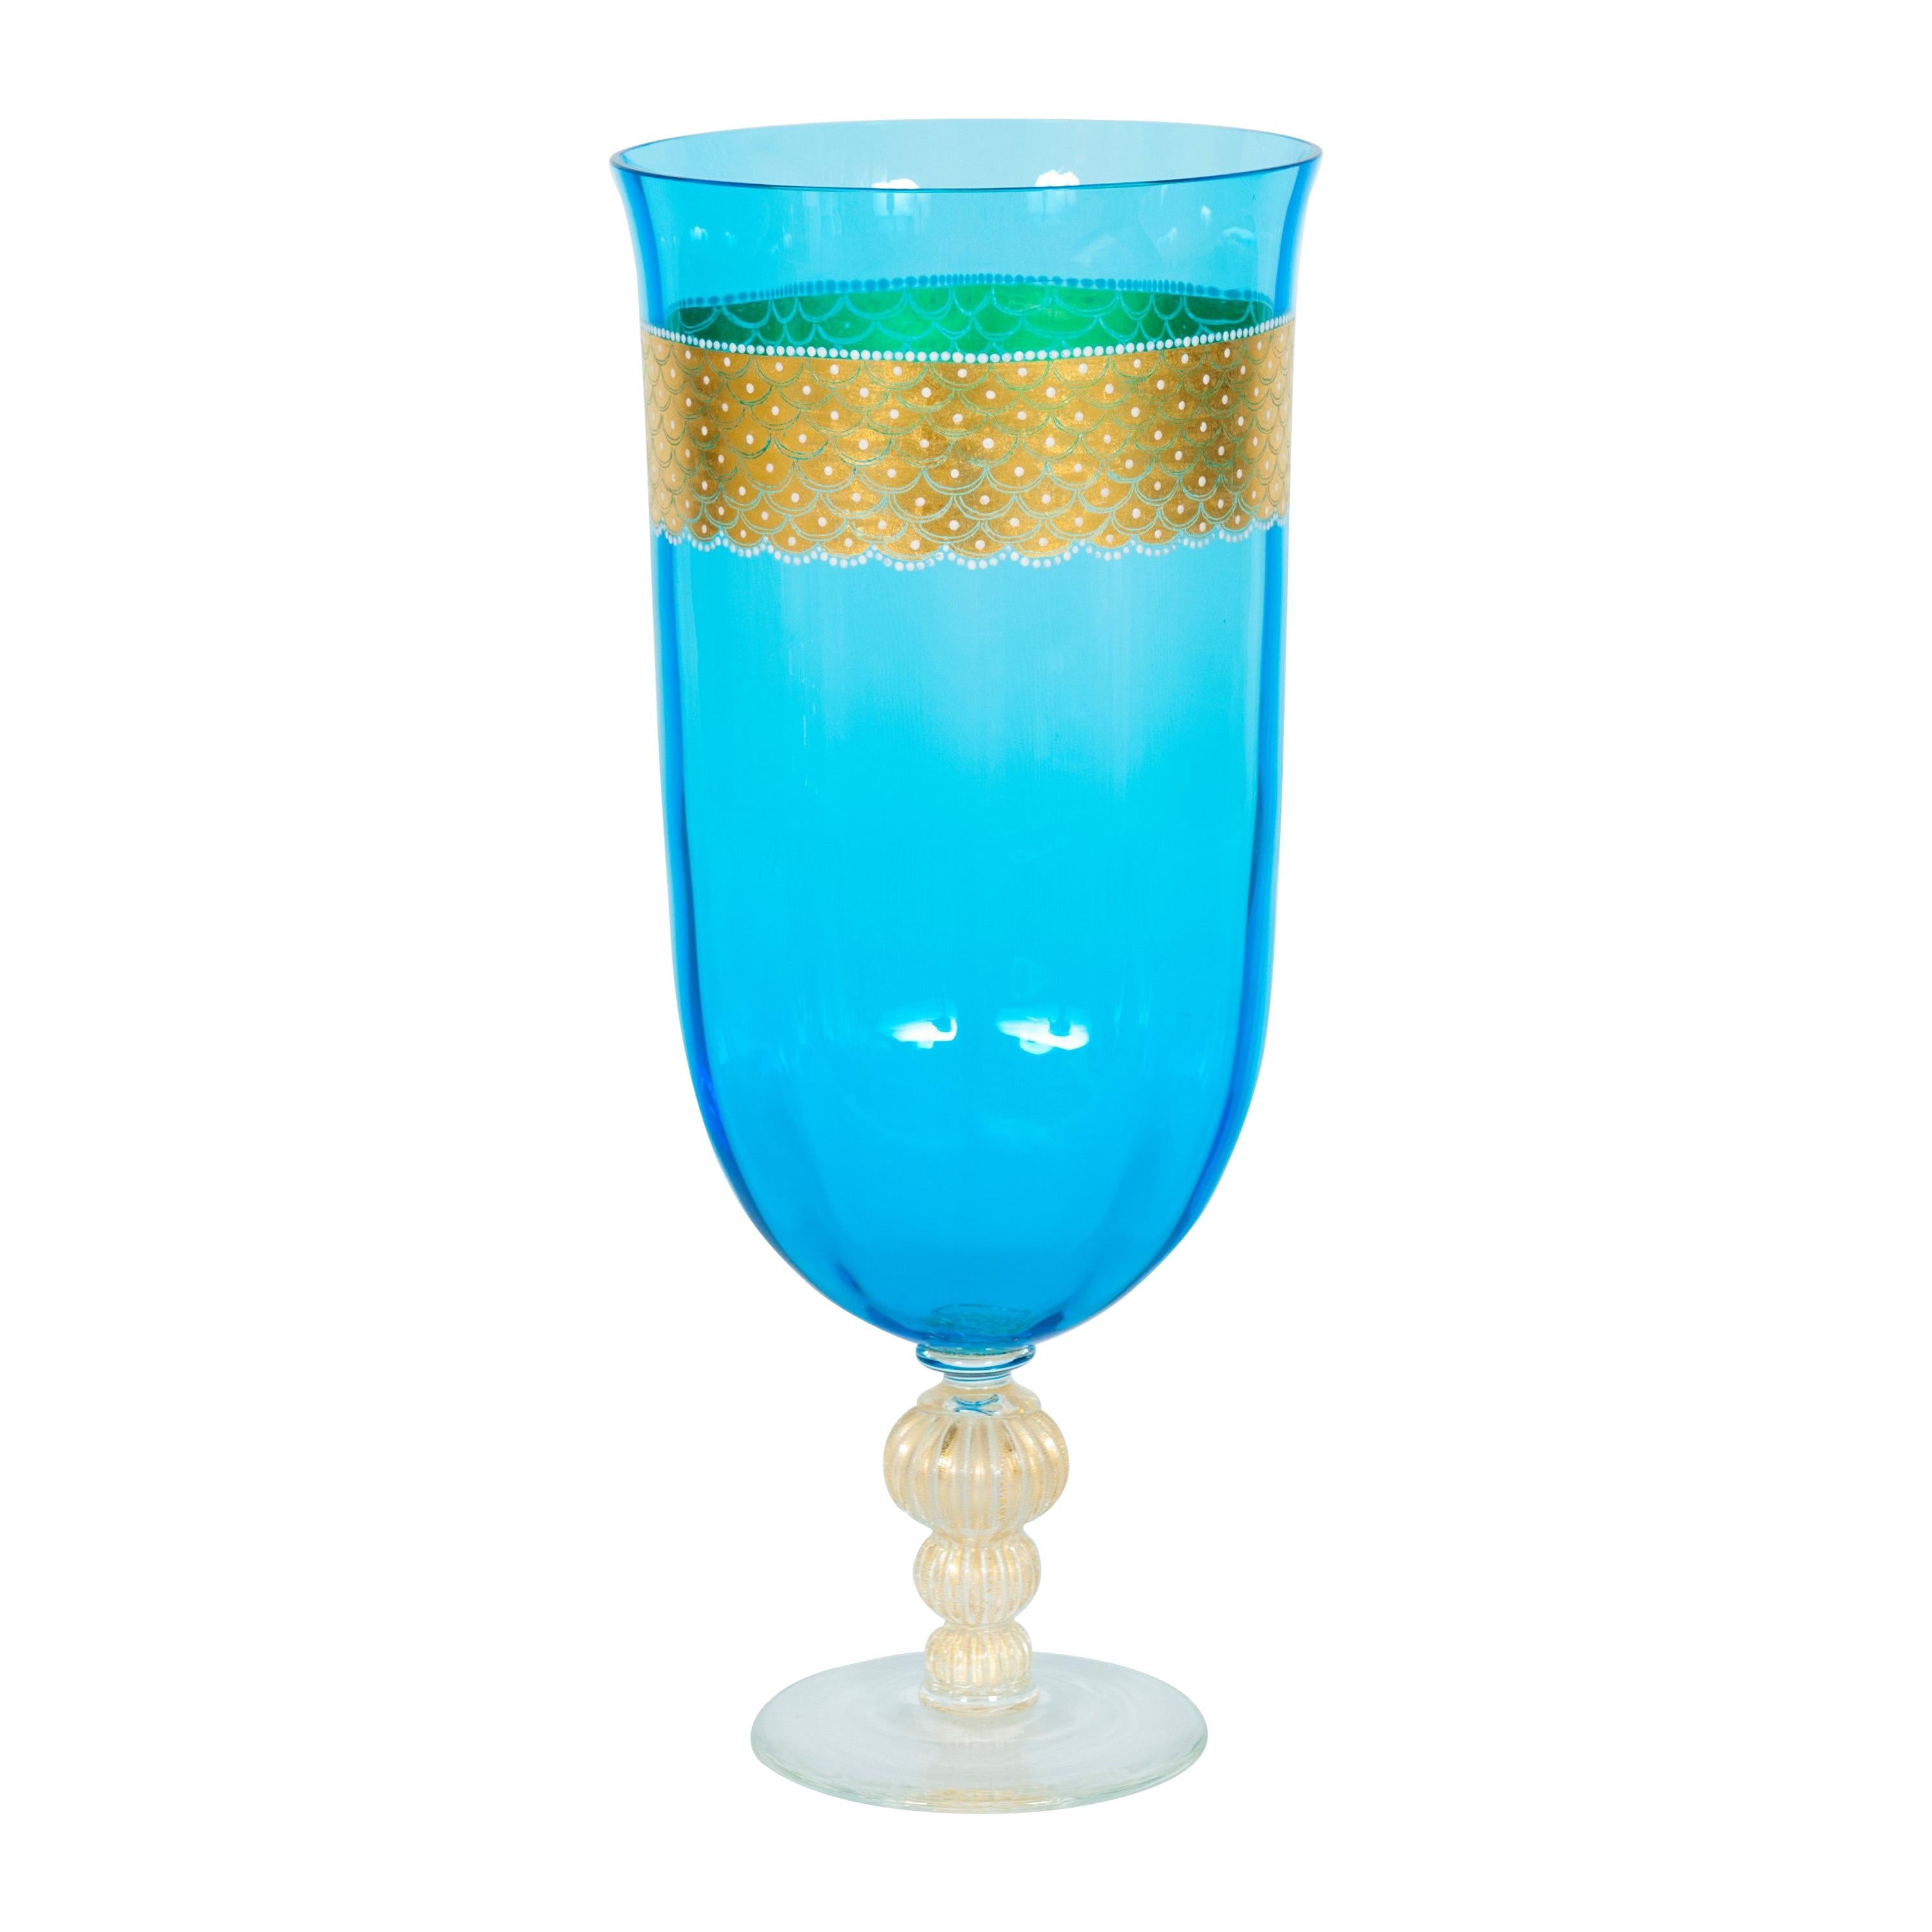 Mid-Century Modern Murano Stemware Glass with Gold Finishes, Blue Color, Italy